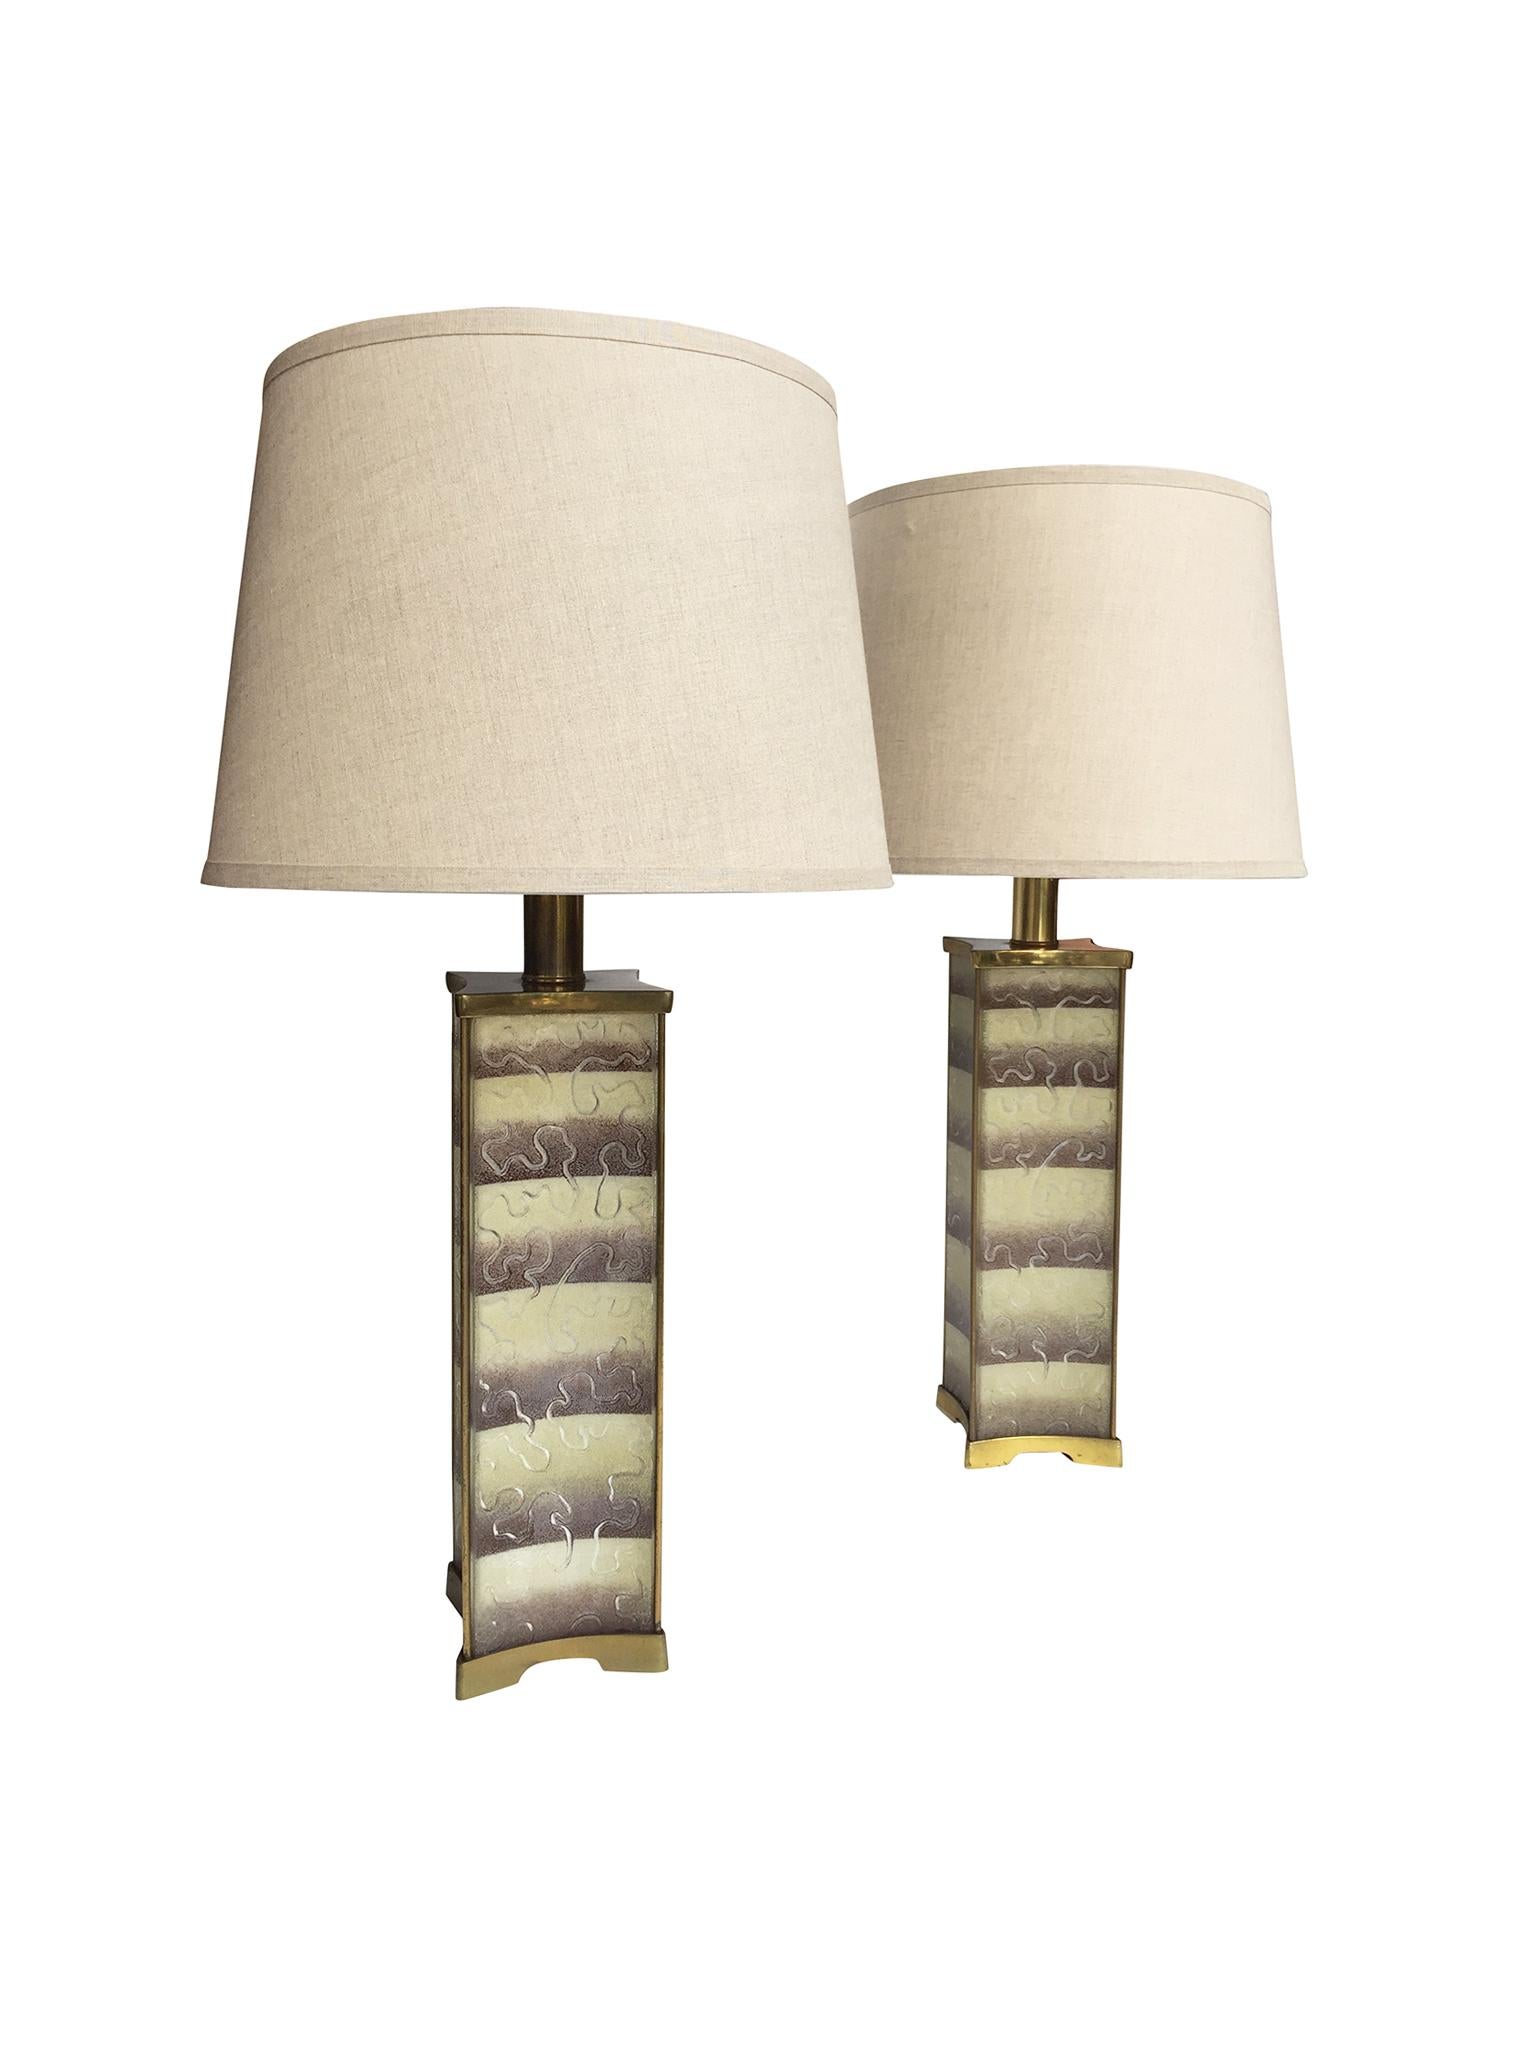 These elegant table lamps were manufactured by Lightolier in the 1940s. They are incredibly detailed in their design and are comprised of a brass frame, base, and hardware, frosted glass inserts, a mirrored interior, and glass diffusers. The frosted